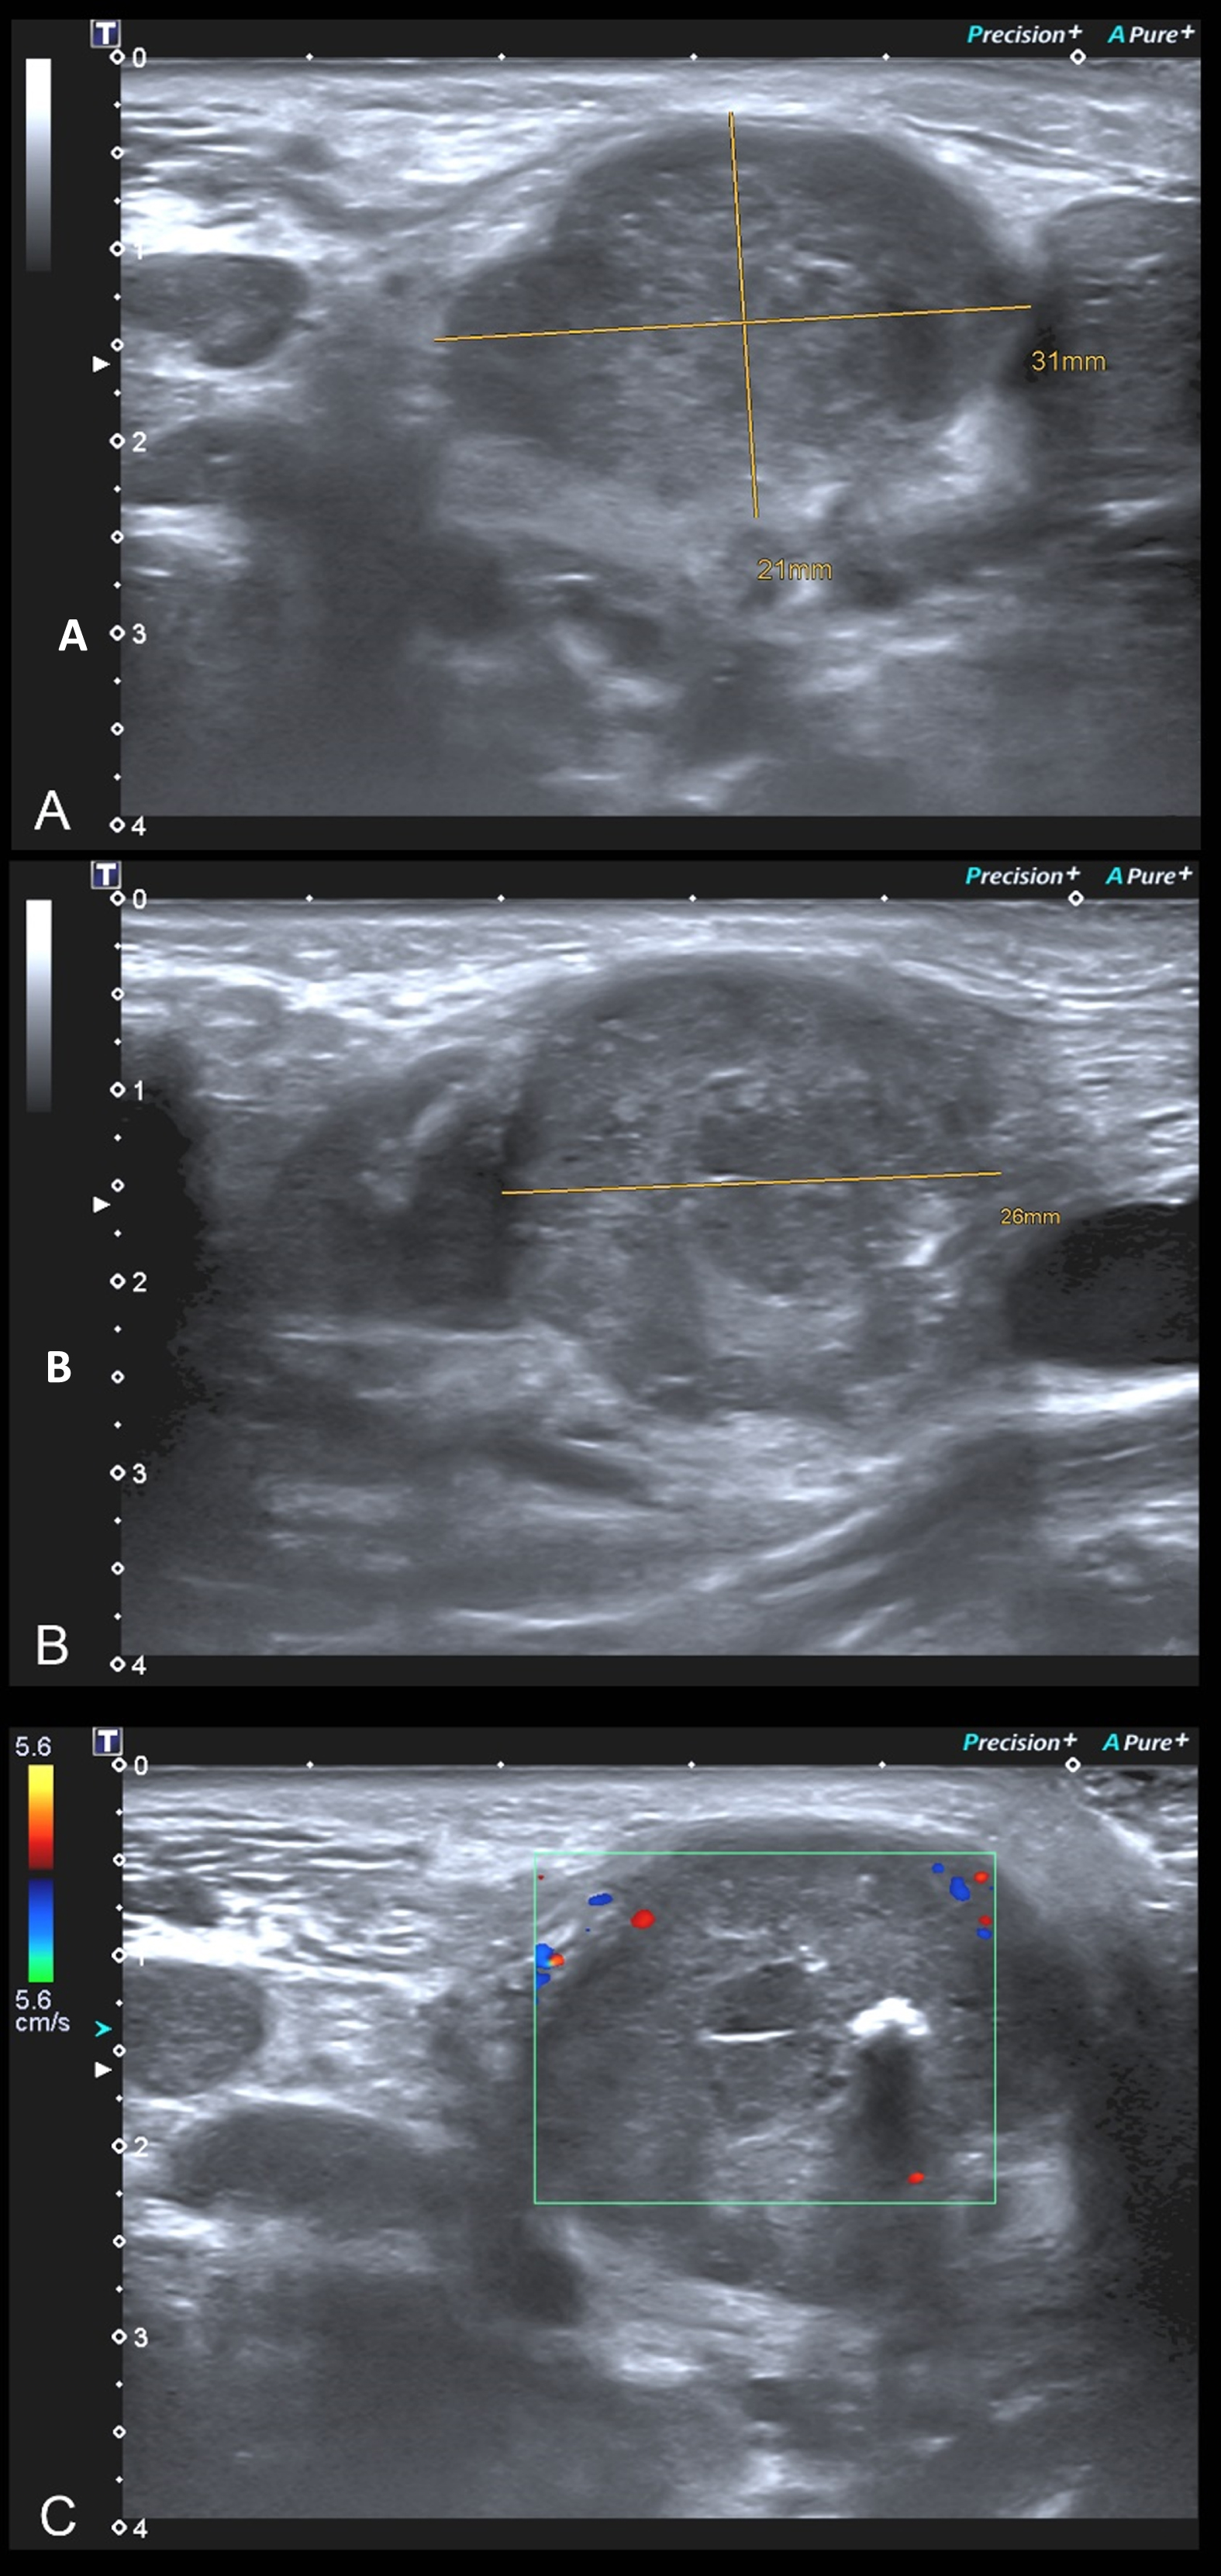 B-Mode Sonography (A, B) and Doppler-Sonography (C), performed to identify and safely evaluate the lesion intended to be biopsied with US-CNB.